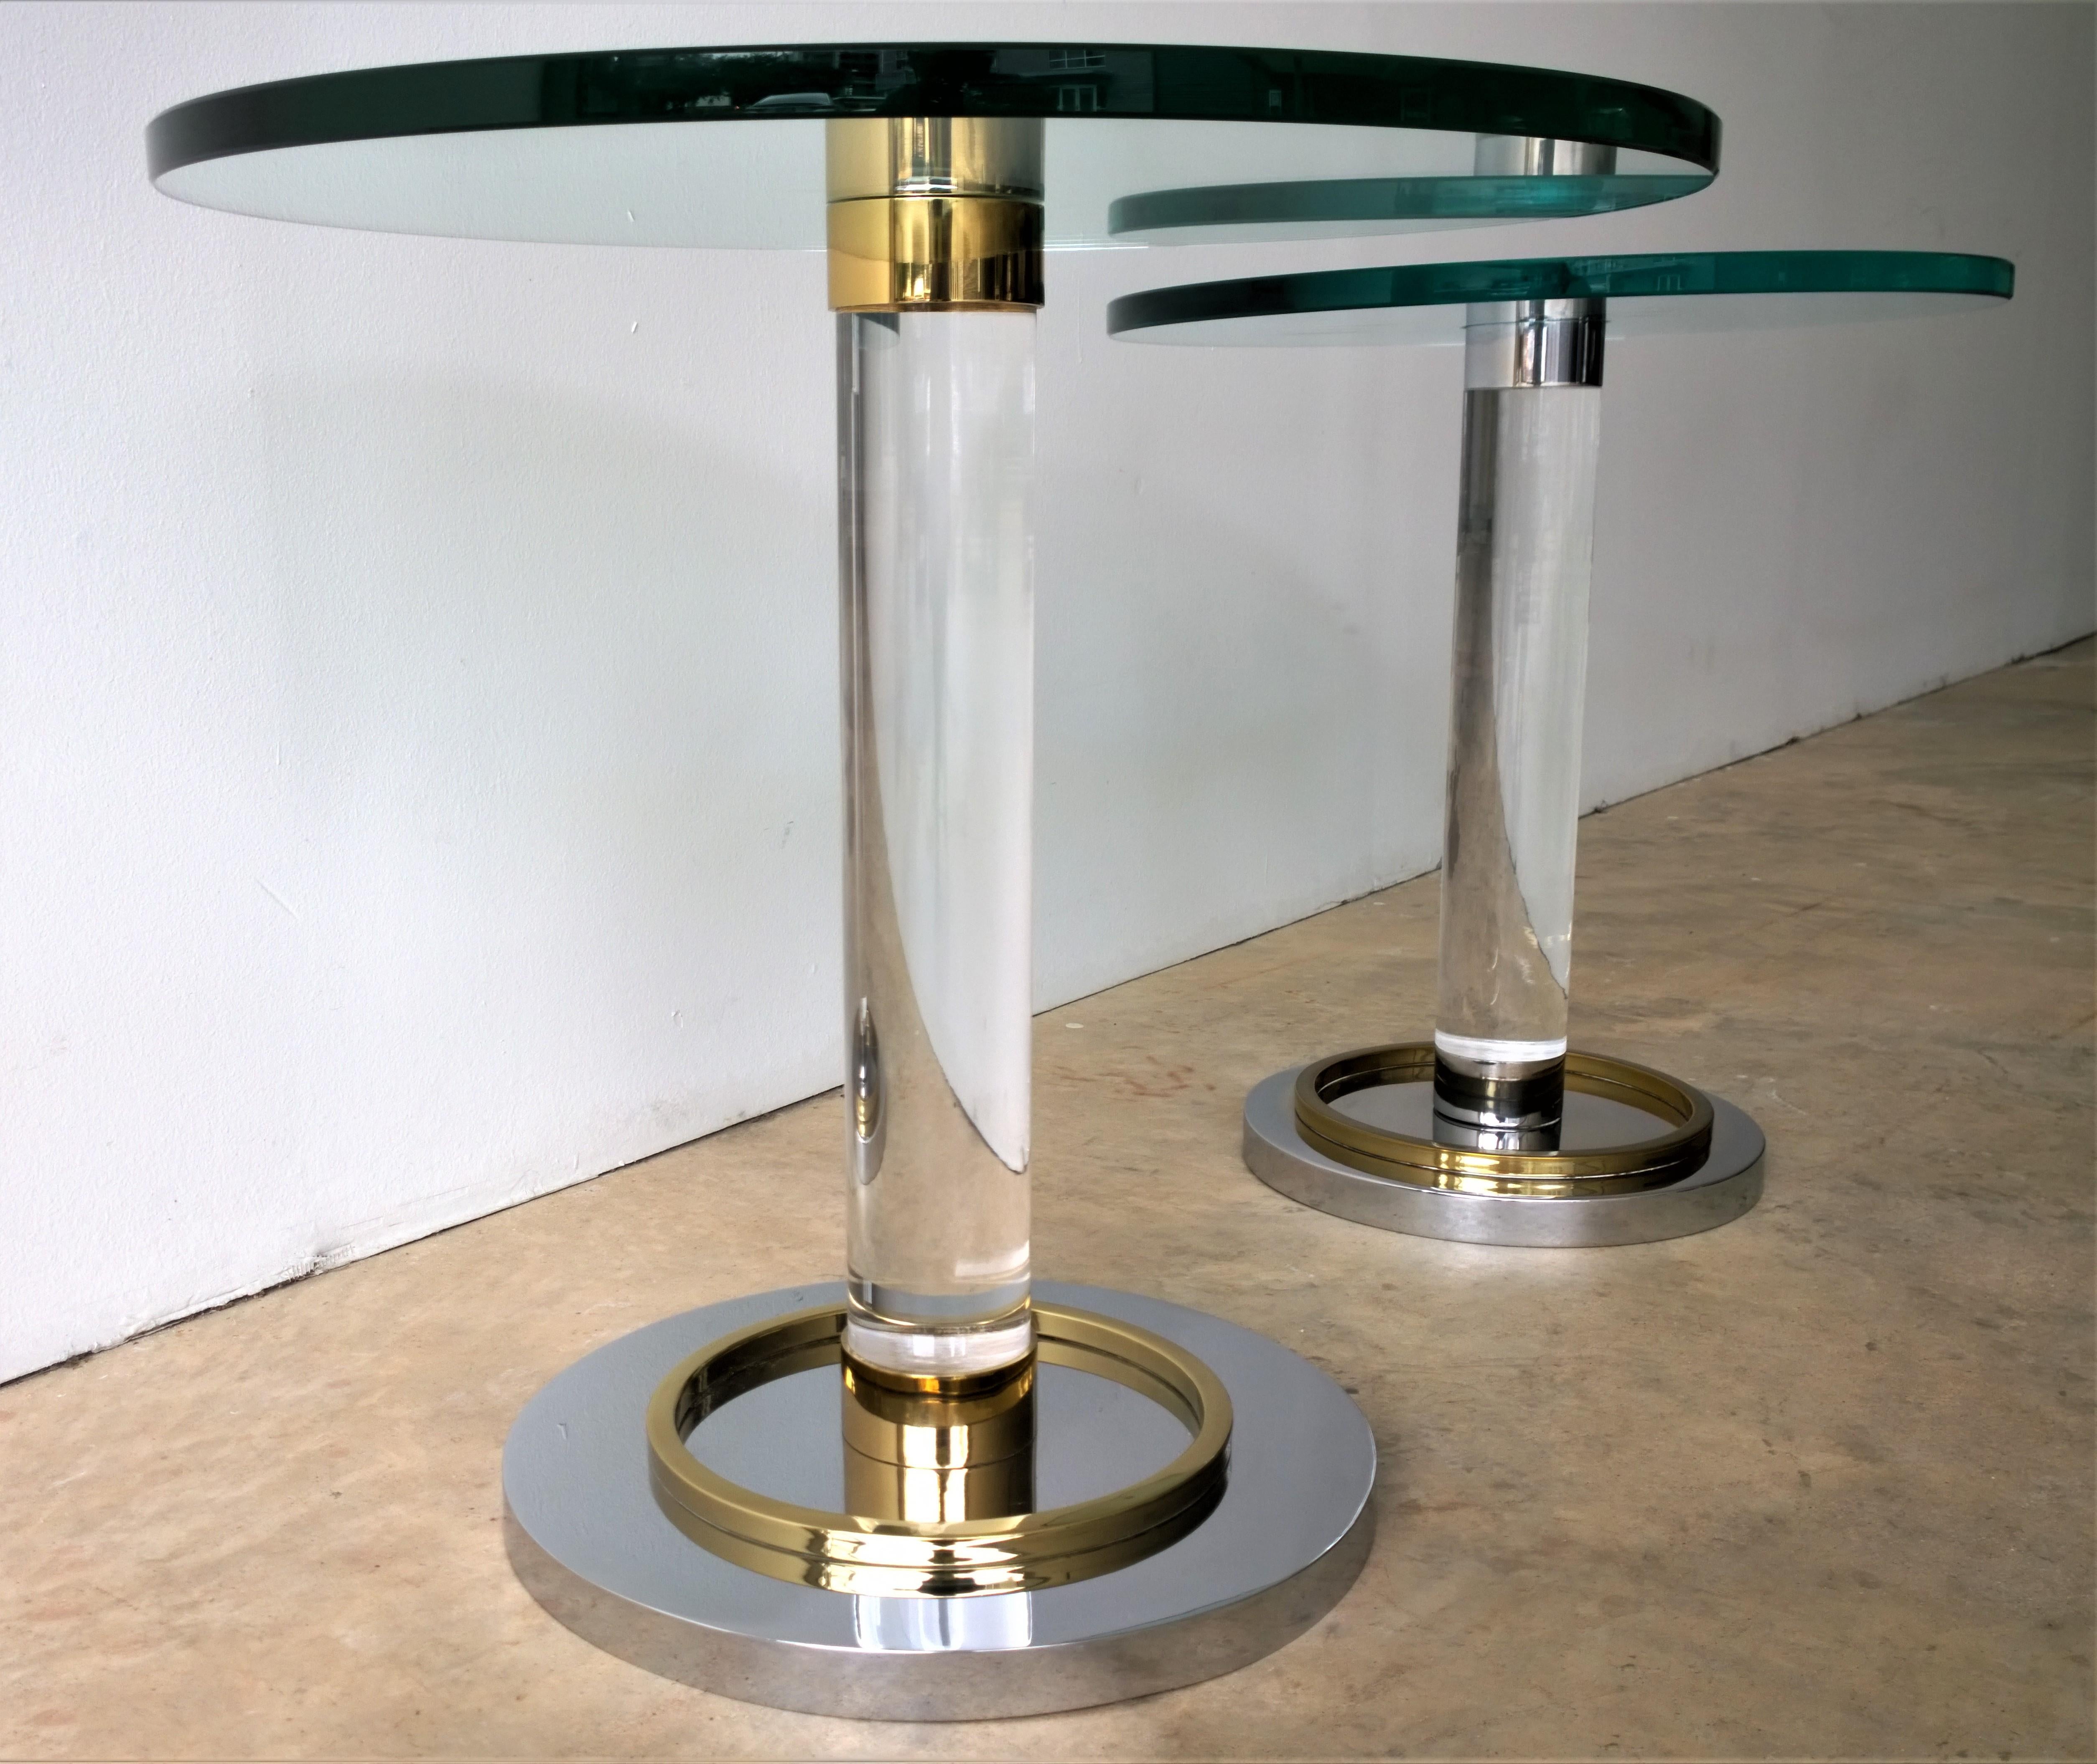 Offered is a Mid-Century Modern stunning pair of stair stepped occasional/ drinks/ side/ stacking / cocktail tables of Lucite, glass, brass and chrome designed by the godfather of Lucite, Charles Hollis Jones. This design is a true example of old